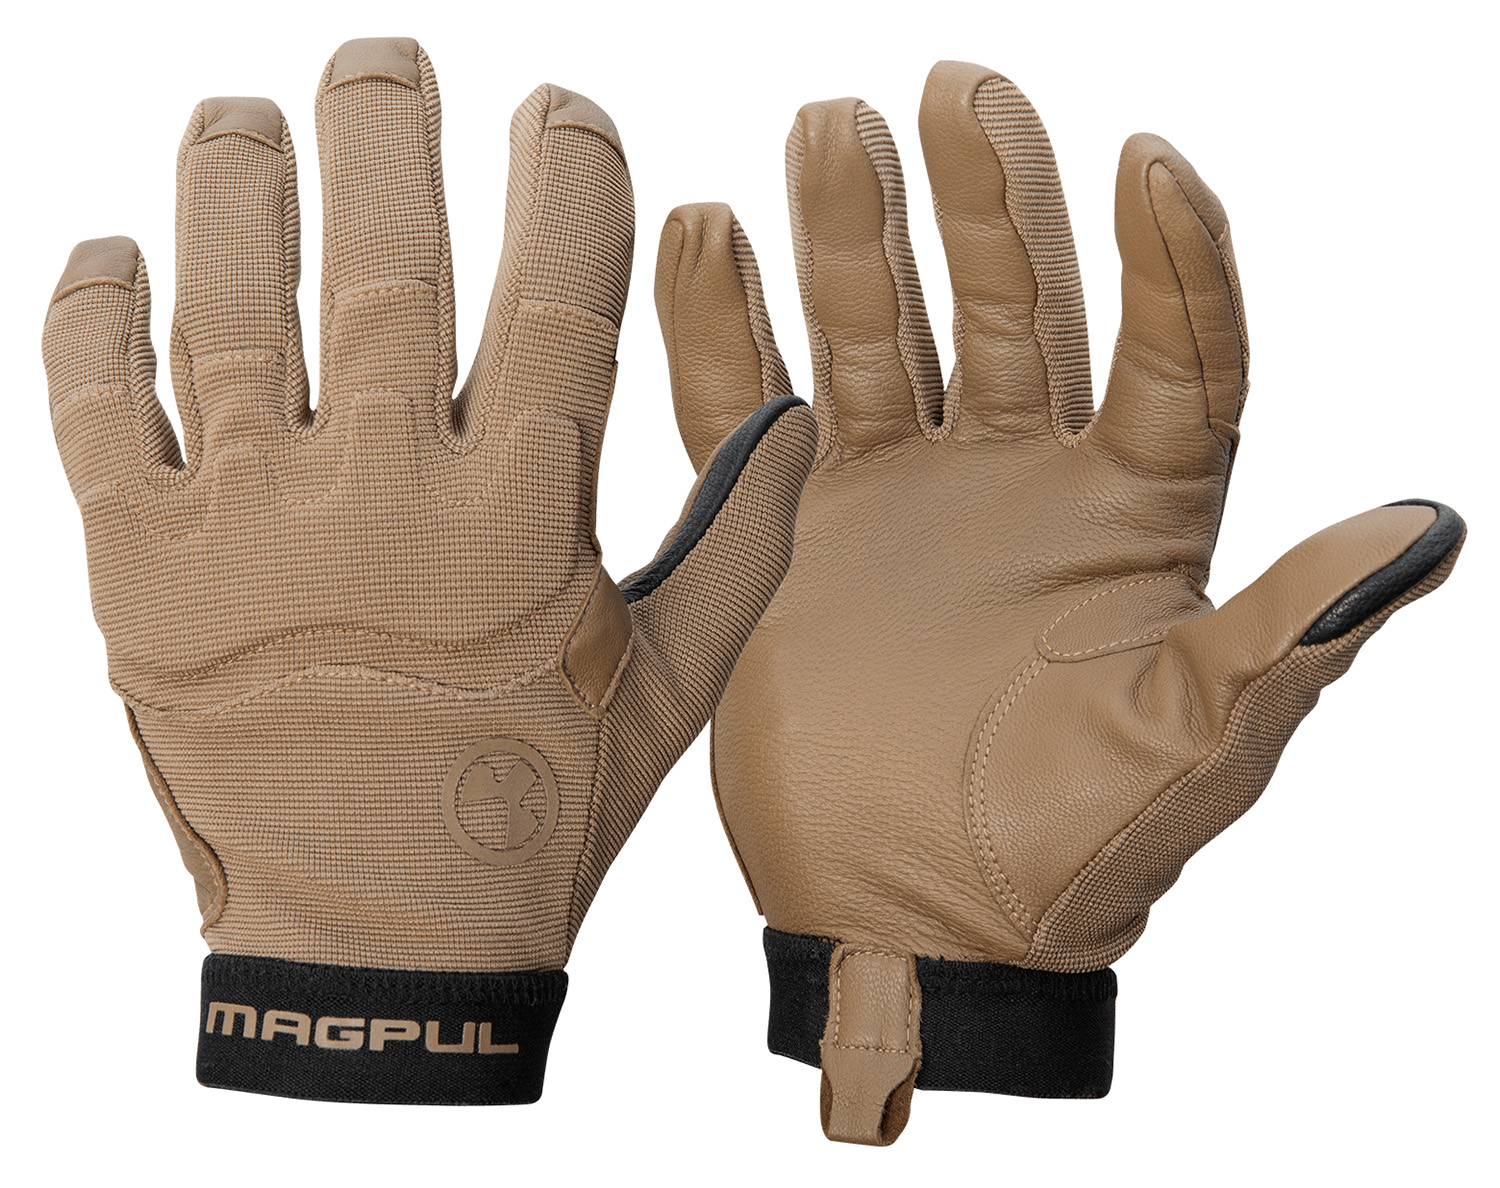 Magpul MAG1015-251 Patrol 2.0 Gloves Coyote Nylon/Leather 2XL